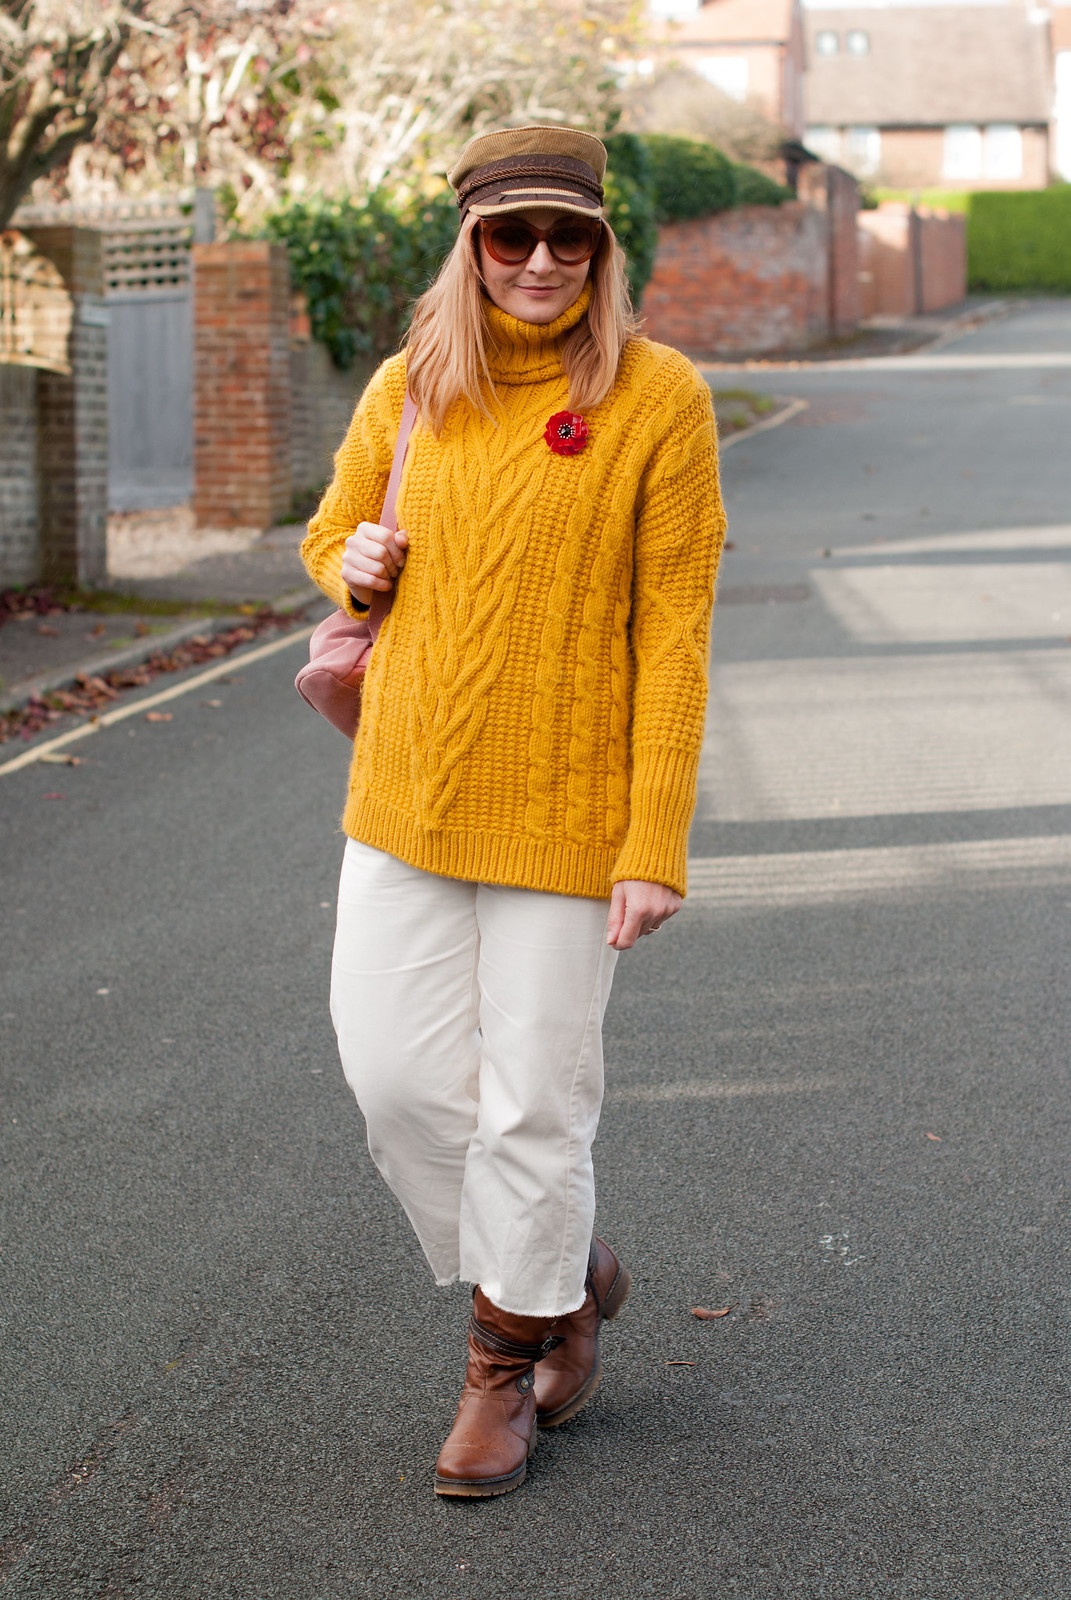 Autumn winter fall style - casual fall dressing - Mustard M&S cable knit oversized roll neck sweater white cropped wide leg jeans tan boots camel baker boy hat pink suede backpack | Not Dressed As Lamb, over 40 style